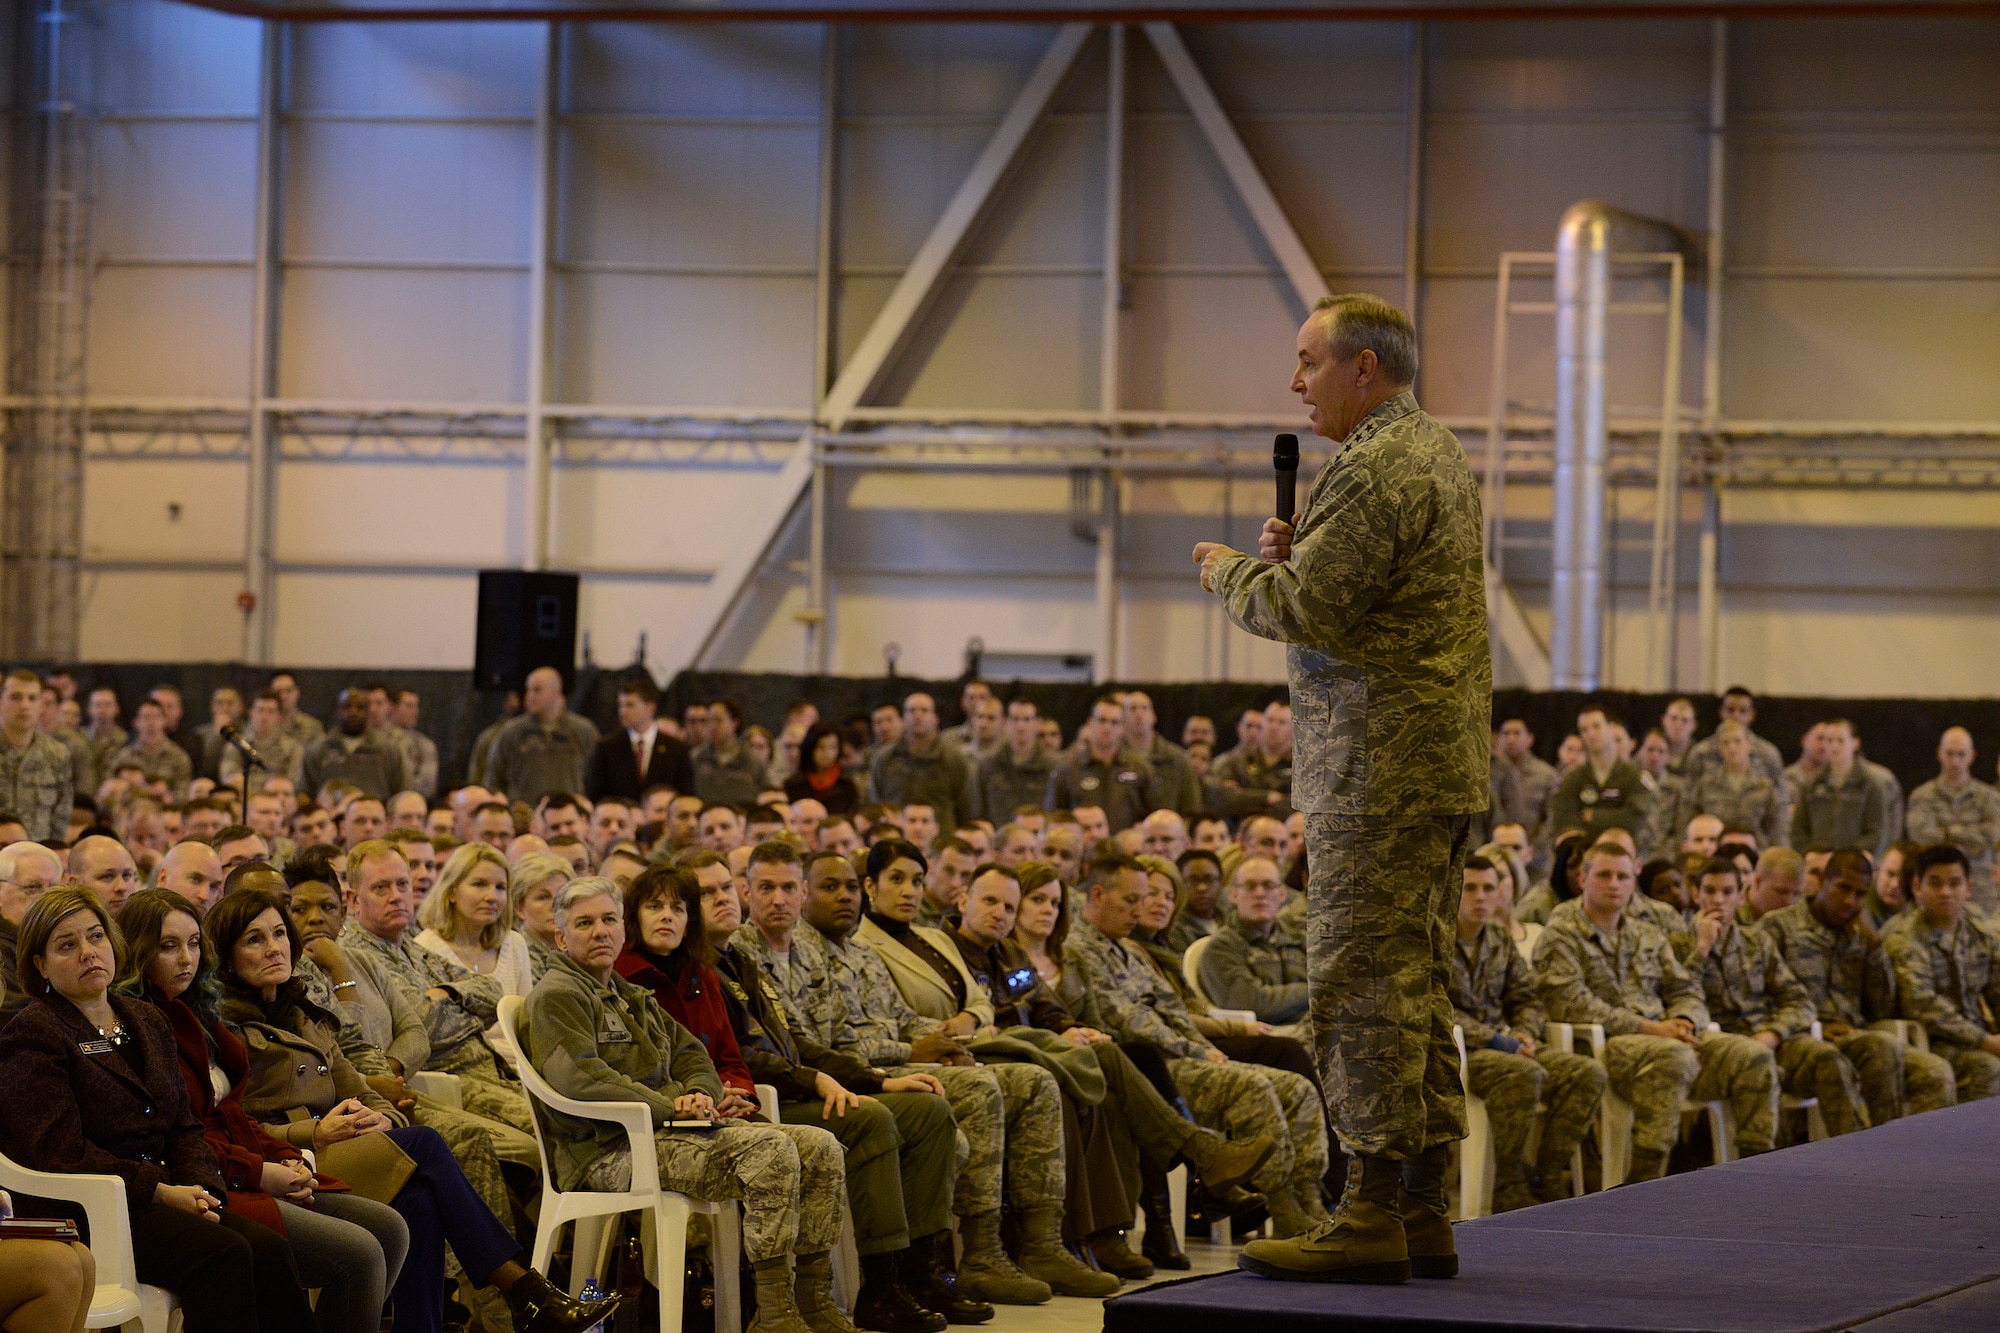 Air Force Chief of Staff Gen. Mark A. Welsh III addresses Aviano Air Base Airmen during an all call Dec. 22, 2014, at Aviano AB, Italy. During his visit to the 31st Fighter Wing, Welsh received a mission brief, participated in an open discussion during breakfast with Airmen and hosted an all call to address some of the main challenges the Air Force will face in 2015 and beyond. (U.S. Air Force photo/Airman 1st Class Ryan Conroy)